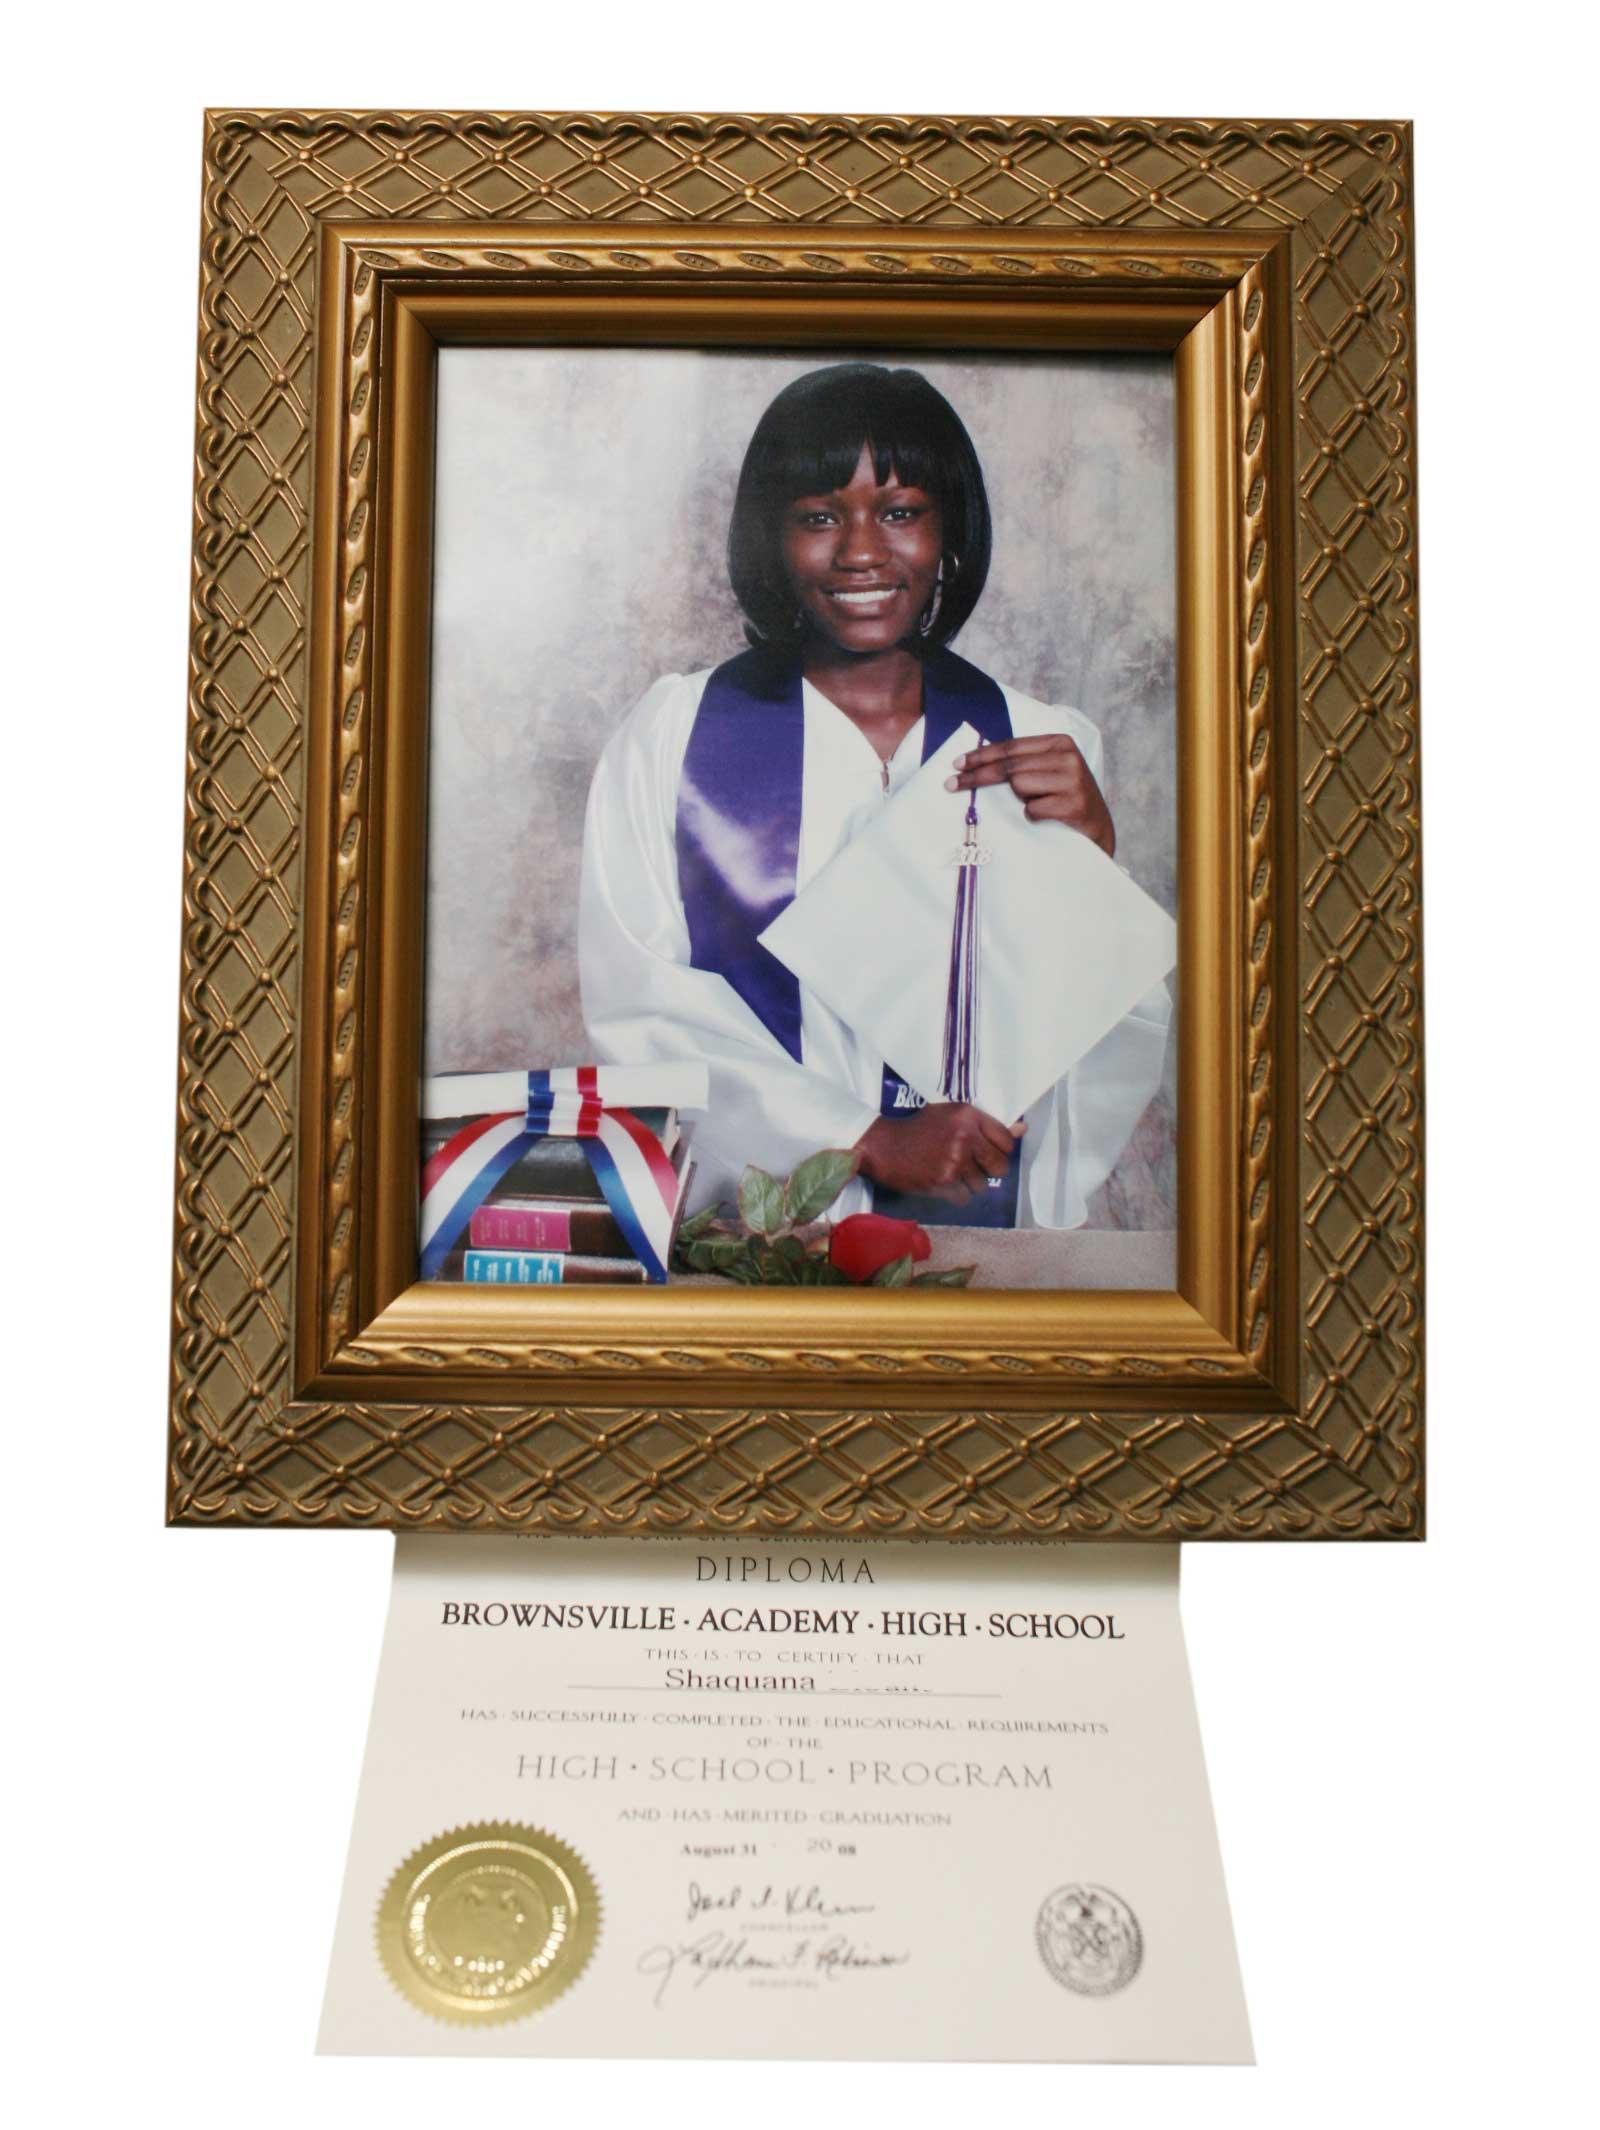 Shaquana at her graduation from High School